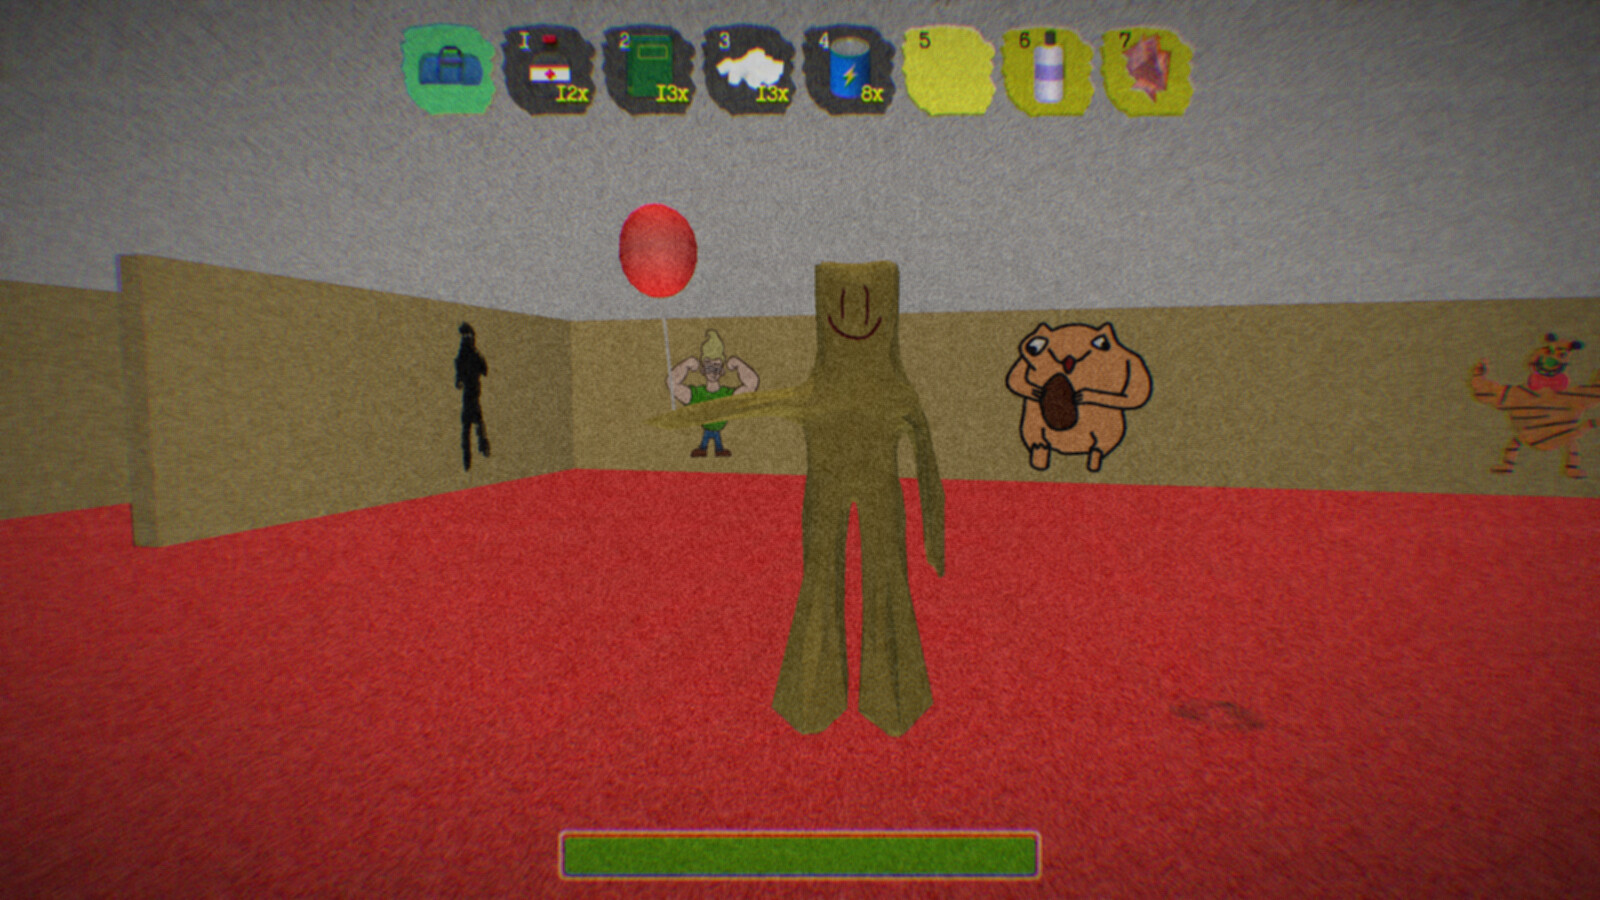 SCP Foundation - KoGaMa - Play, Create And Share Multiplayer Games